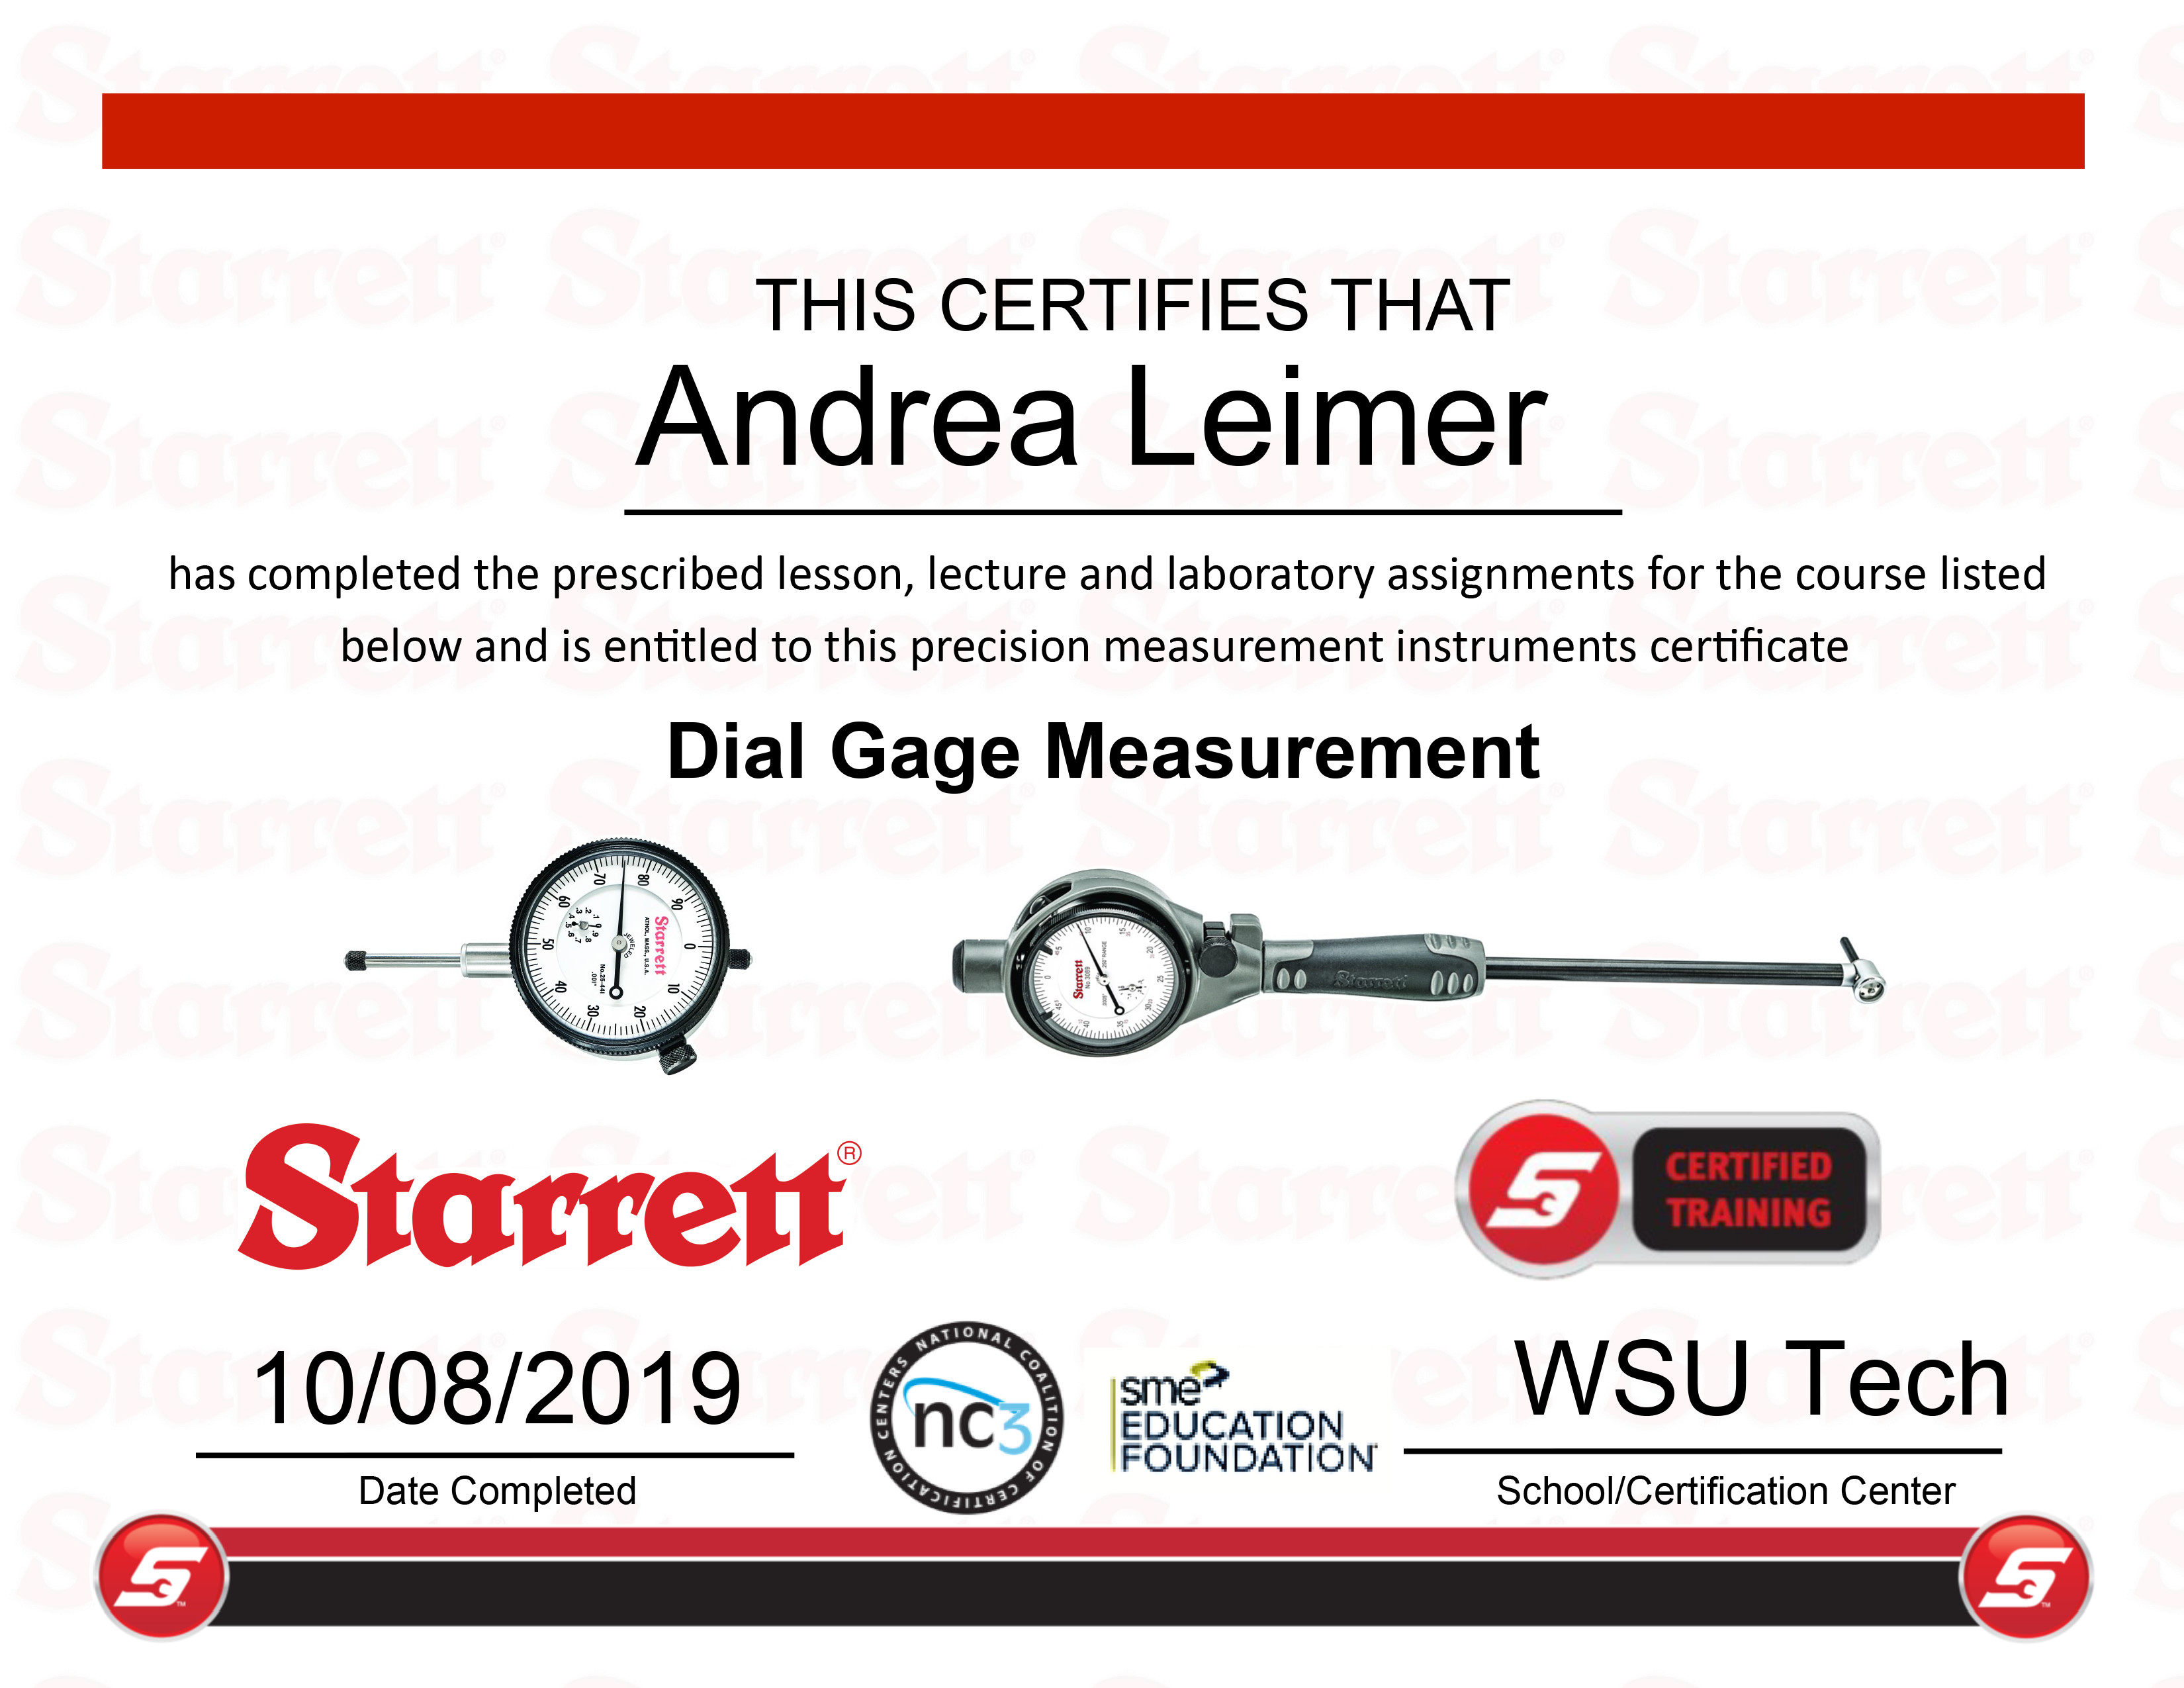 Dial Gage Measurement Certification